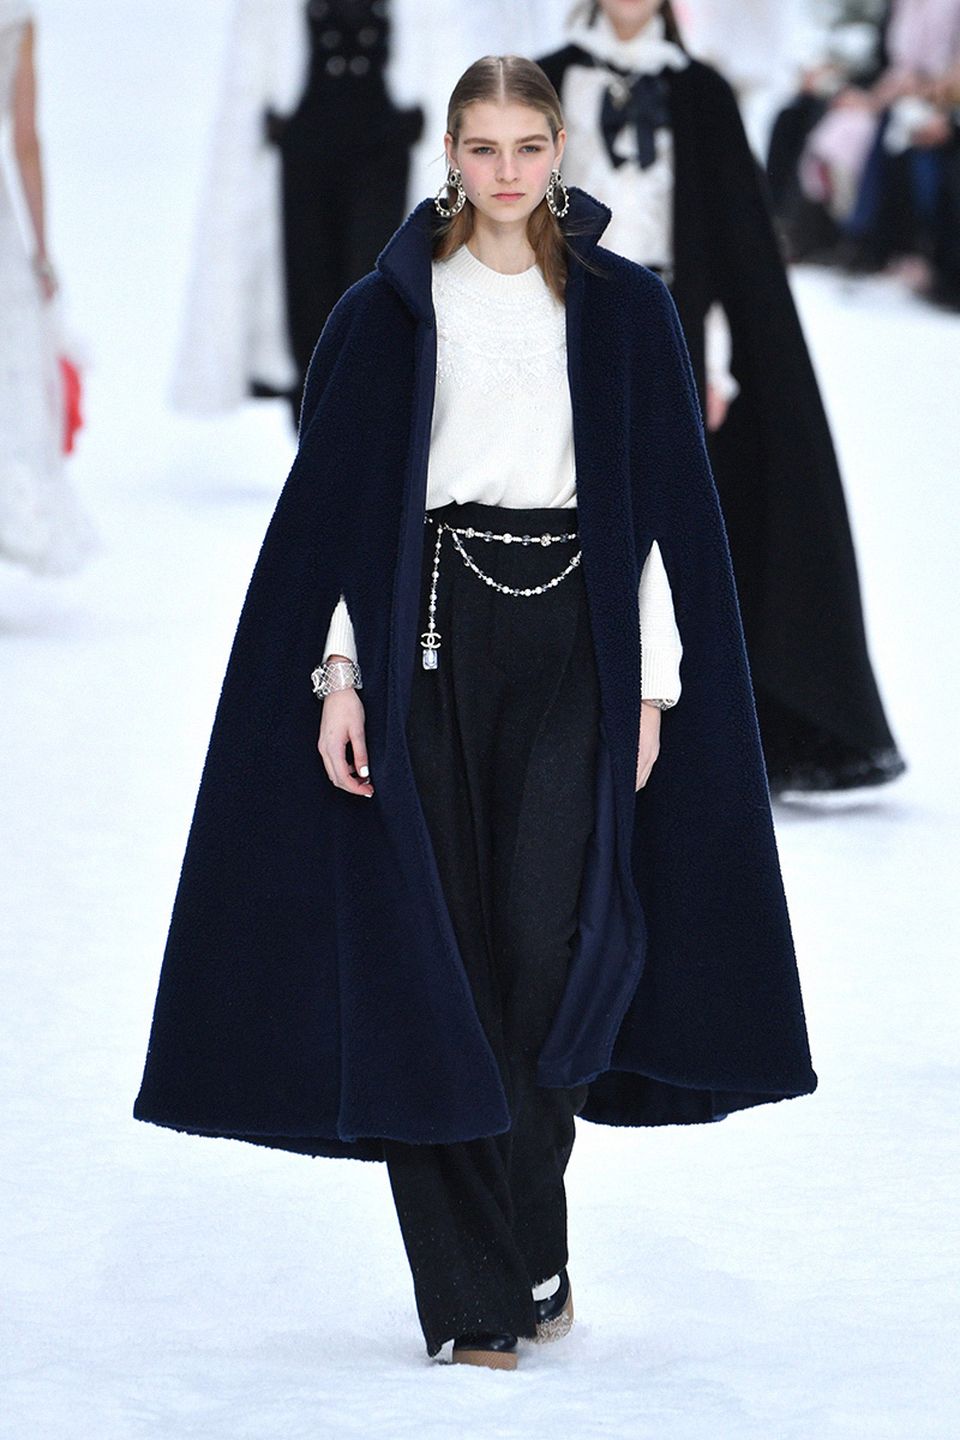 Chanel Pays Tribute to Karl Lagerfeld in Final Runway Show